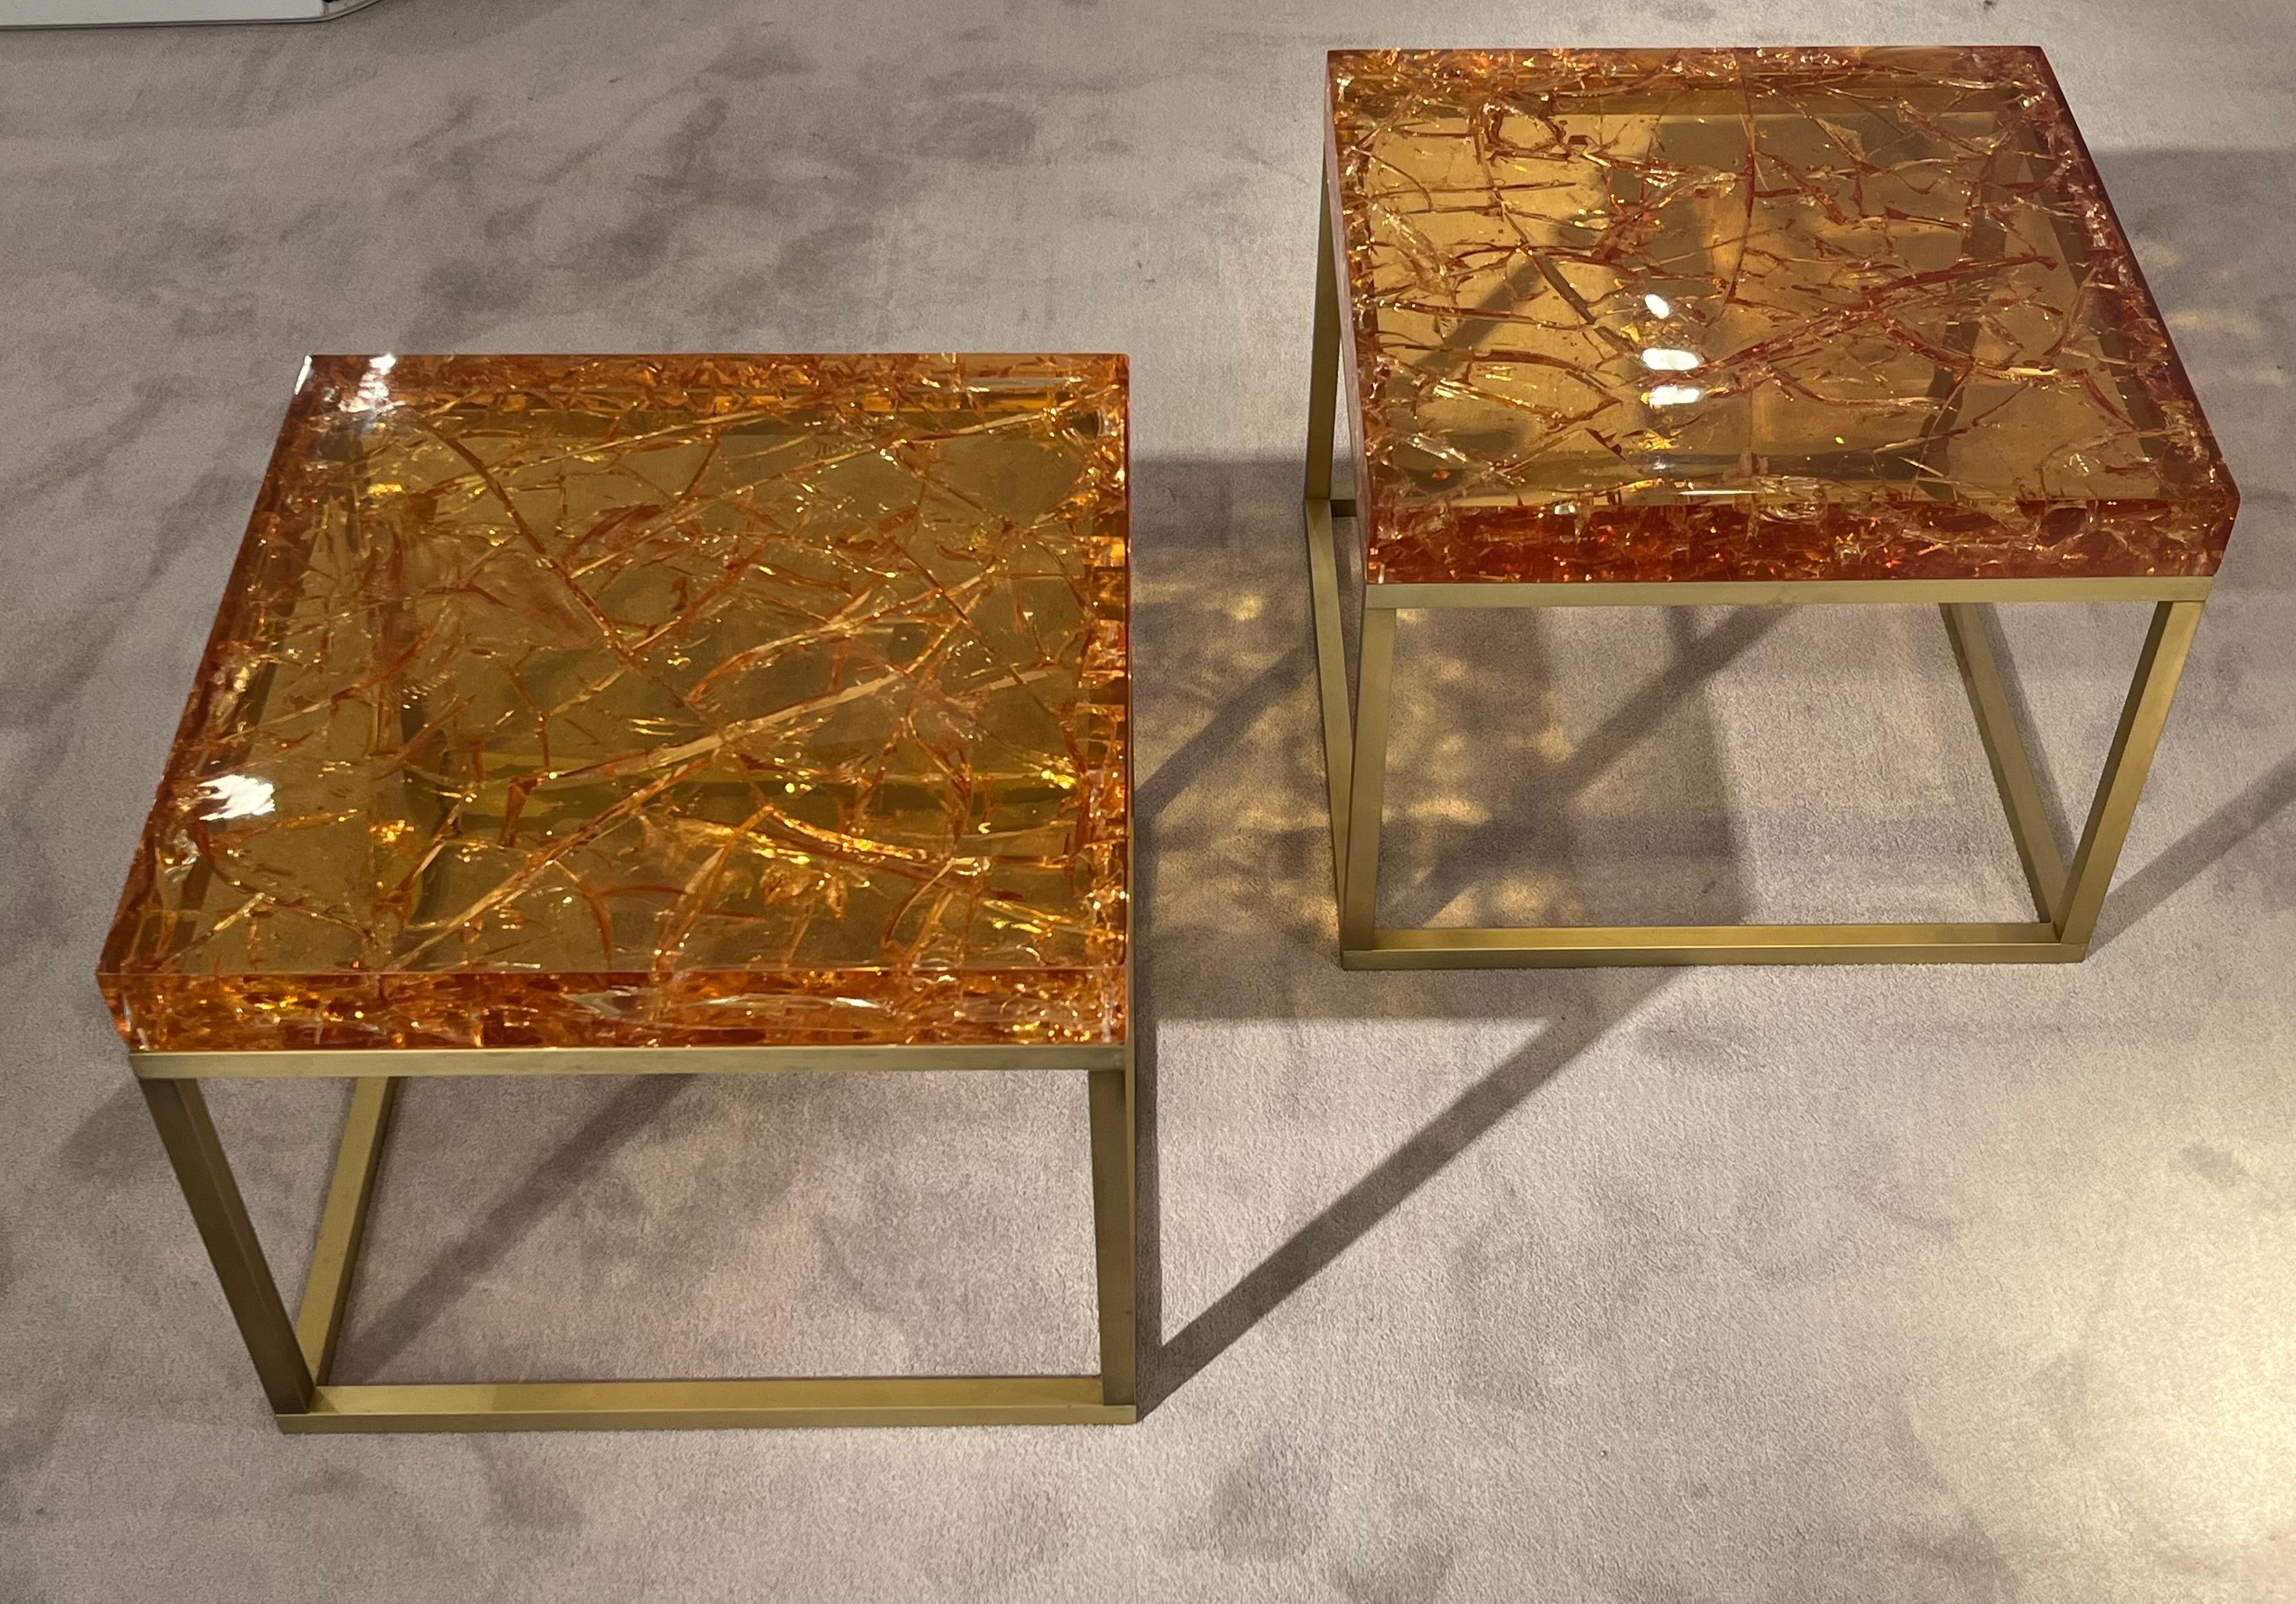 Pair of amber color fractal resin tables
mounted on brass feet
Perfect condition